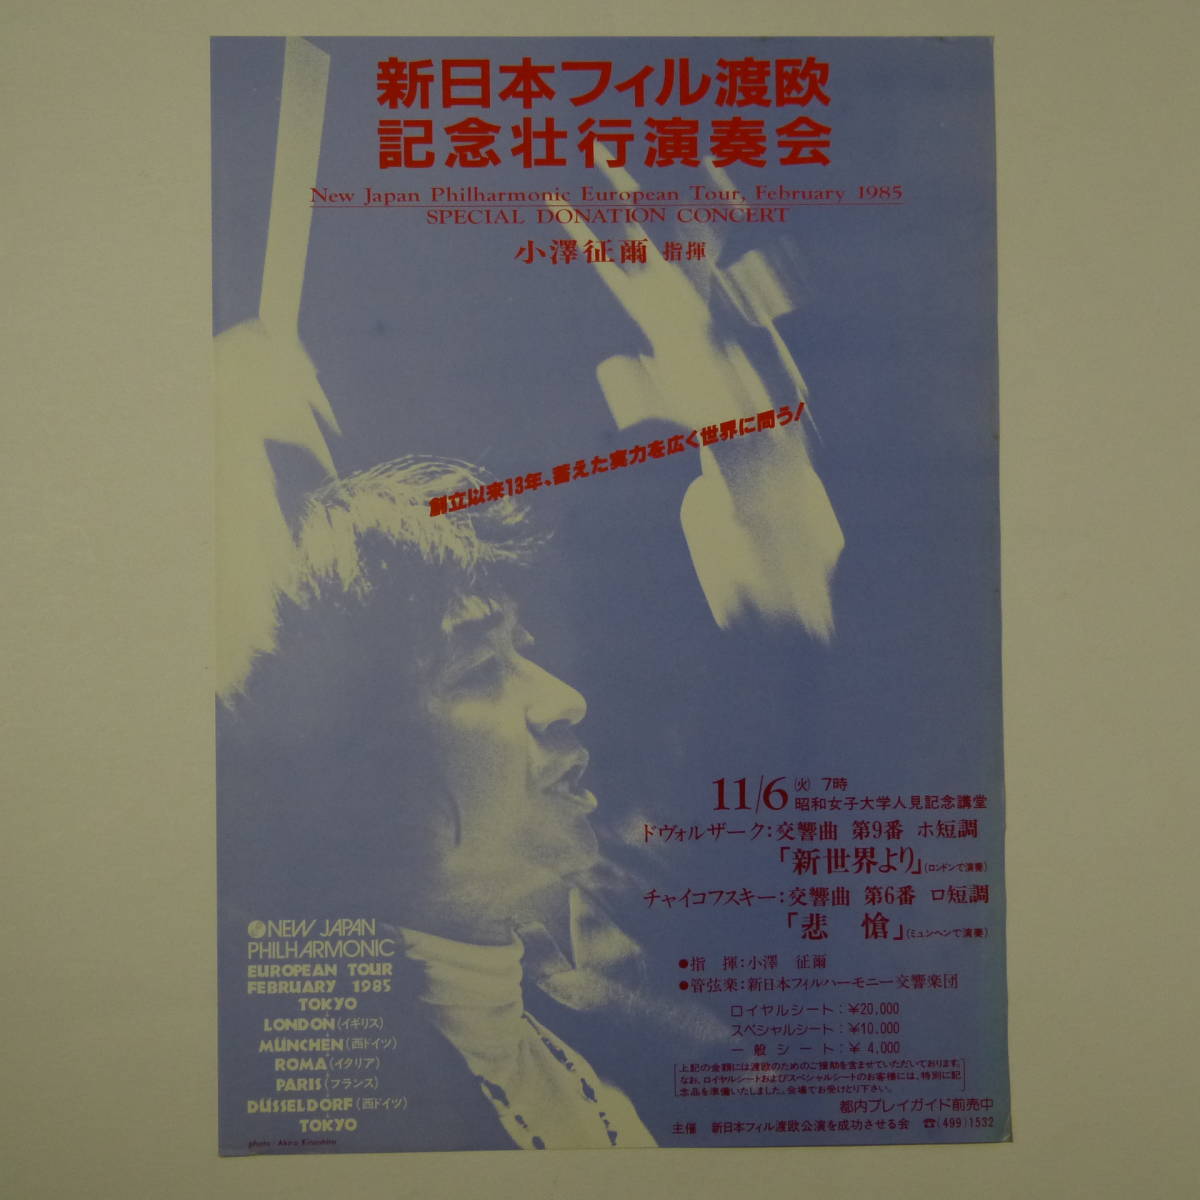  program New Japan Phil is - moni - reverberation comfort . no. 123 times fixed period musical performance .1984 year 10 month 11 day Inoue road . finger . Victoria *m low va:va Io Lynn 